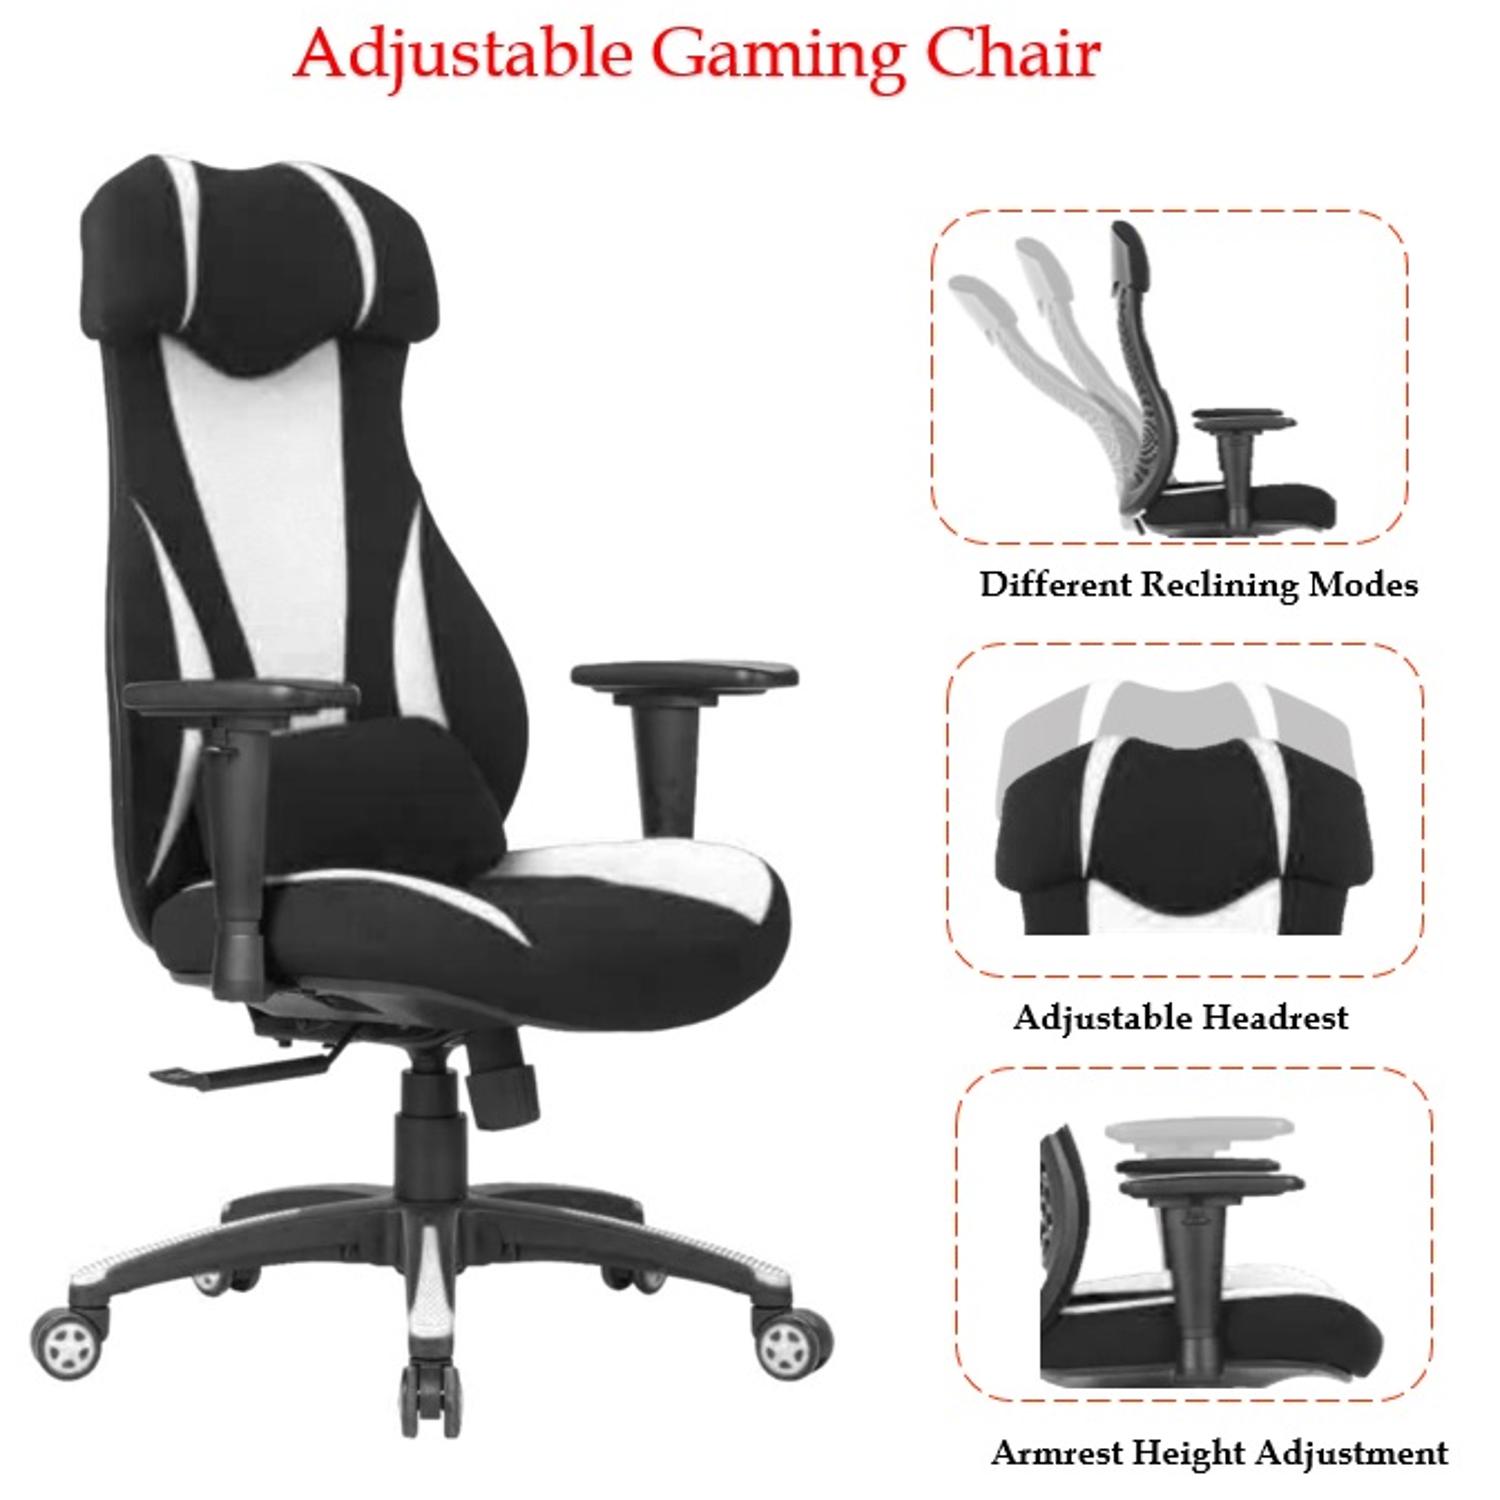 ViscoLogic ARMOUR [Designer Inspired] Premium Grade| Sturdy Foldable Base | Mesh Fabric Home Office Computer Gaming Chair